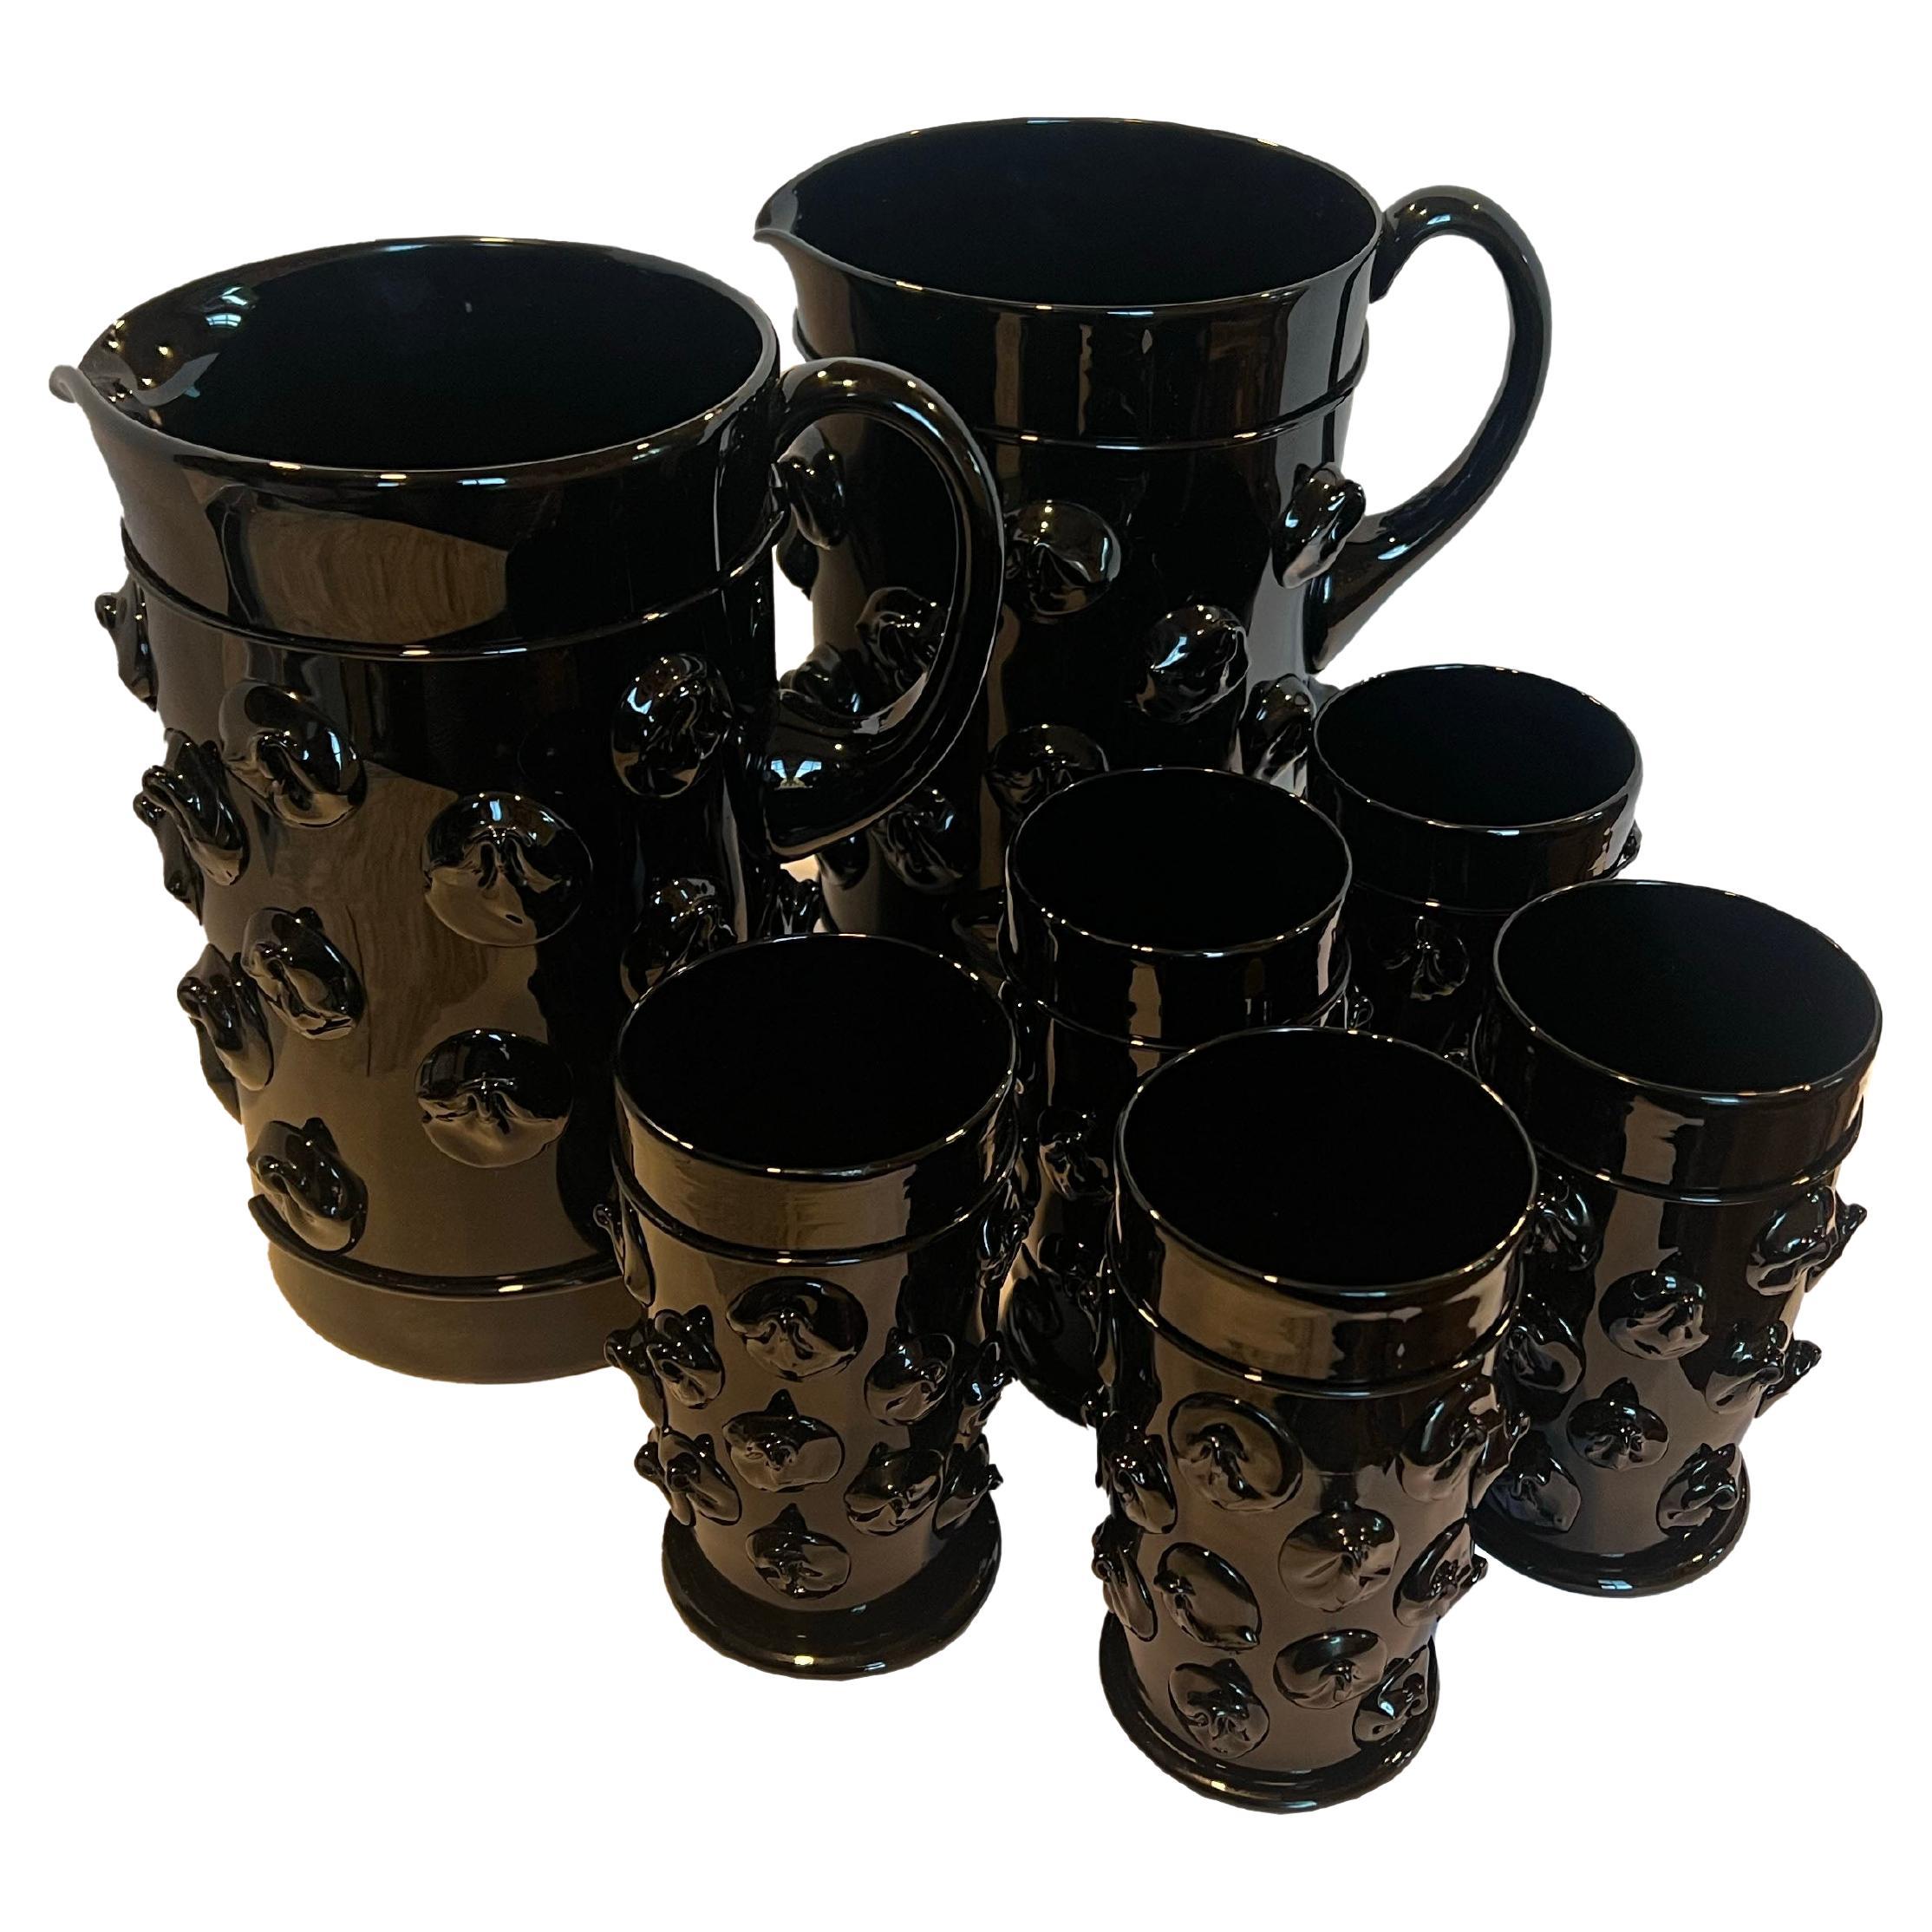 Group of Florence Barware from Andre Leon Talley's Private Collection